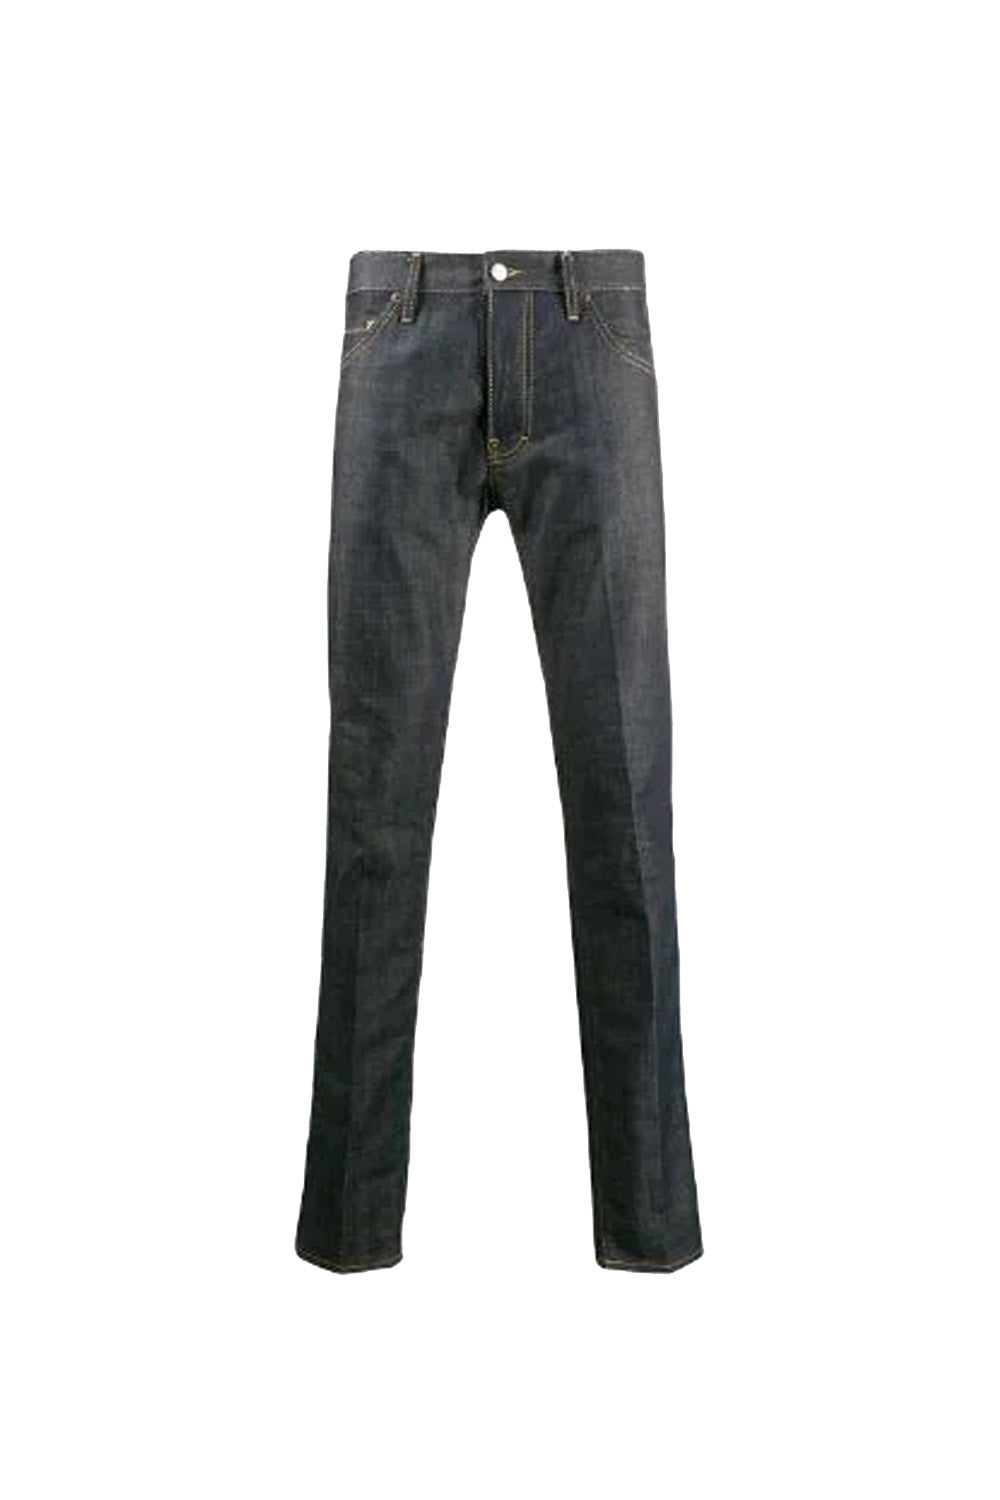 Dsquared2 Cool Guy slim-fit jeans